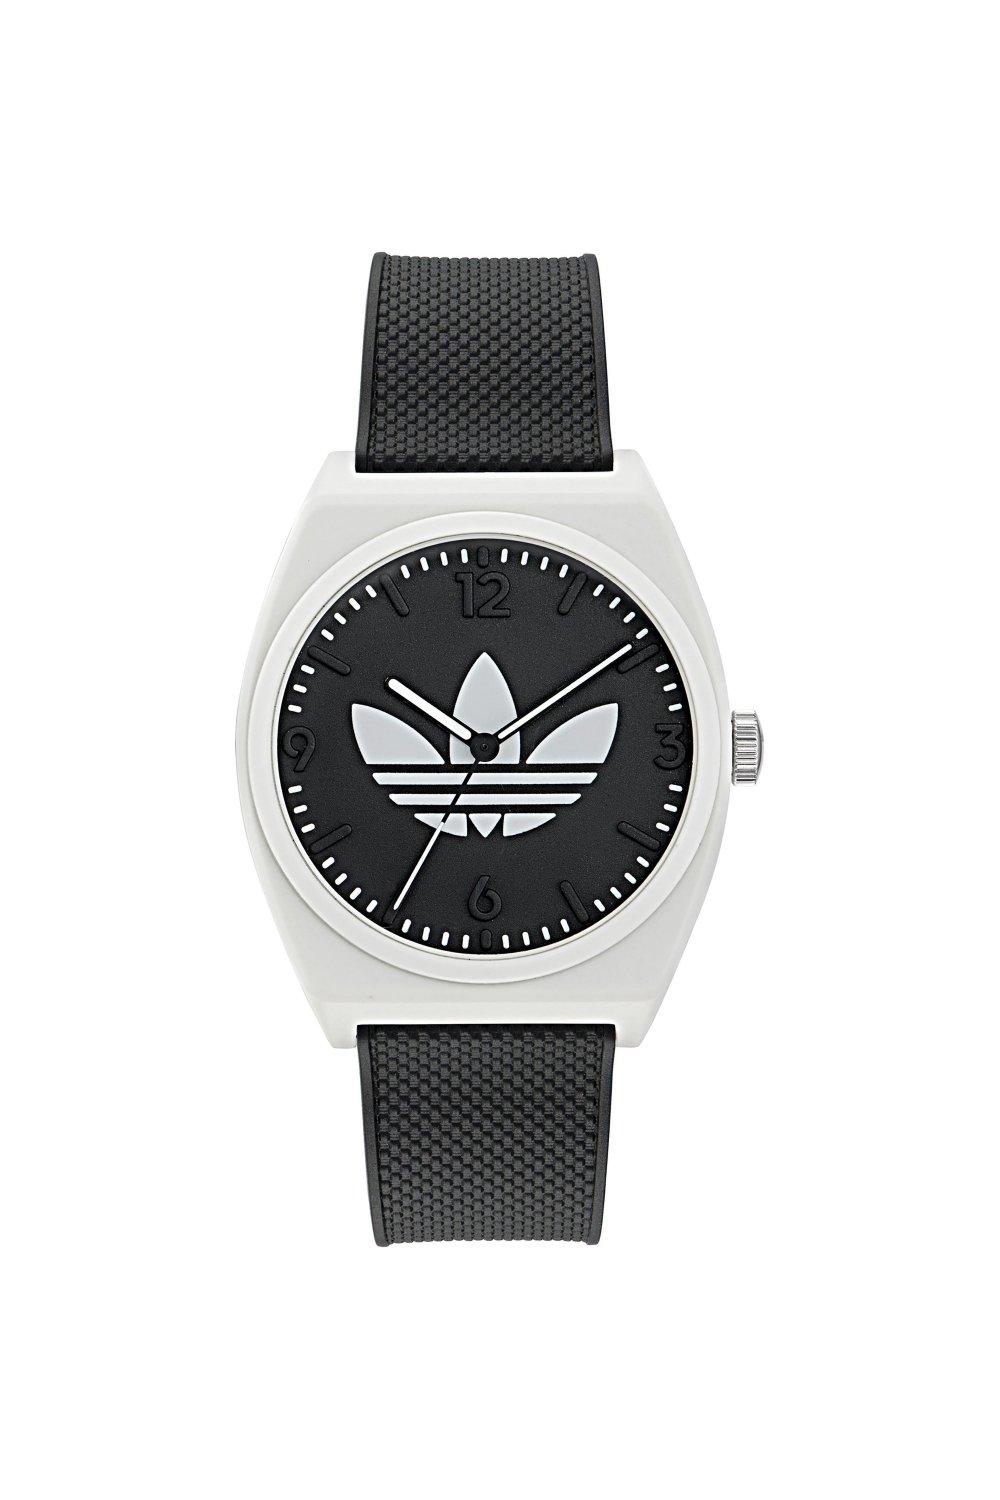 Two Watches | Aost23550 Quartz adidas Project Fashion | Originals Plastic/resin Watch - Analogue